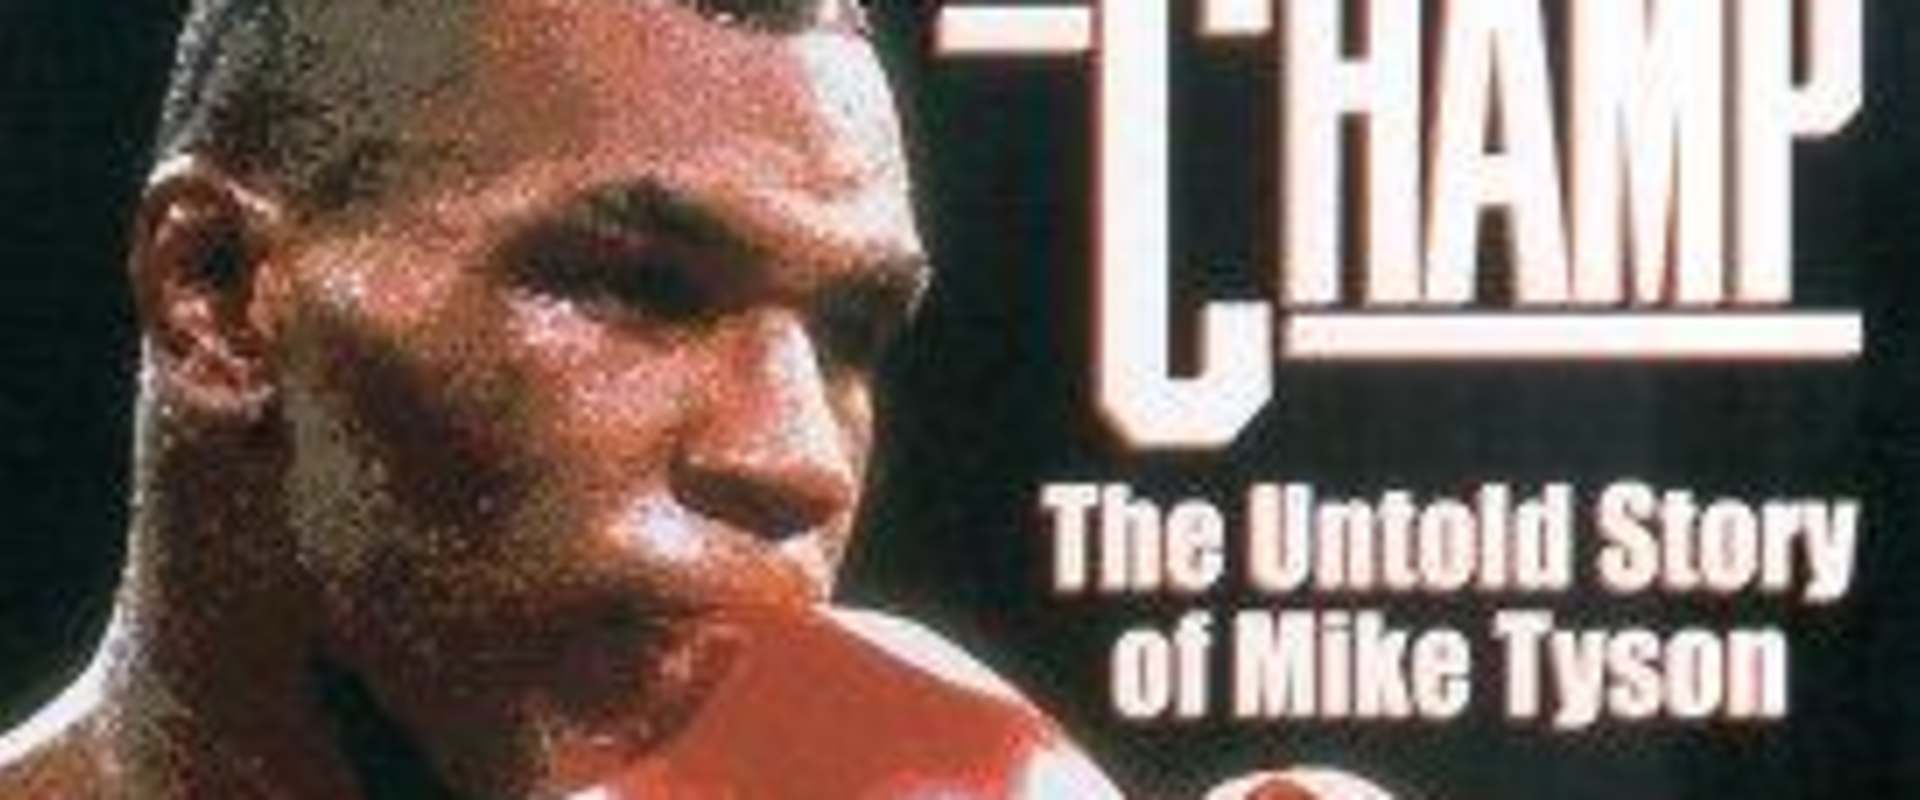 Fallen Champ: The Untold Story of Mike Tyson background 2